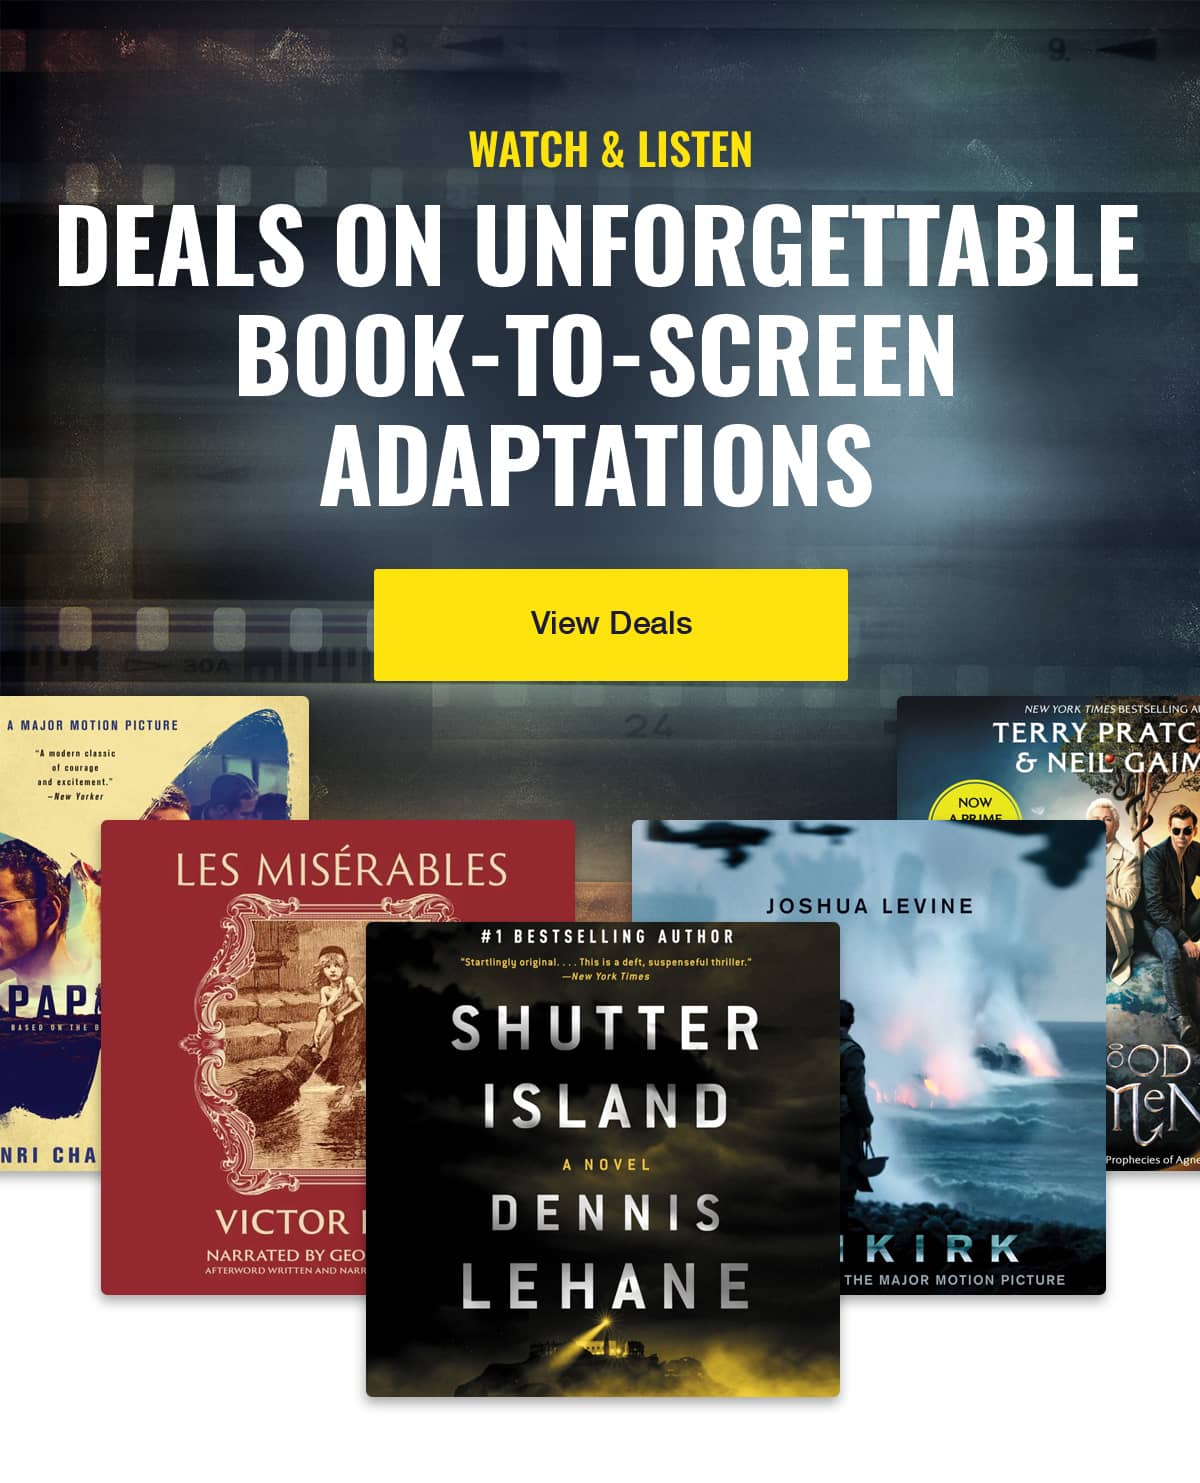 Can't-Miss Deals on Book-to-Screen Adaptations